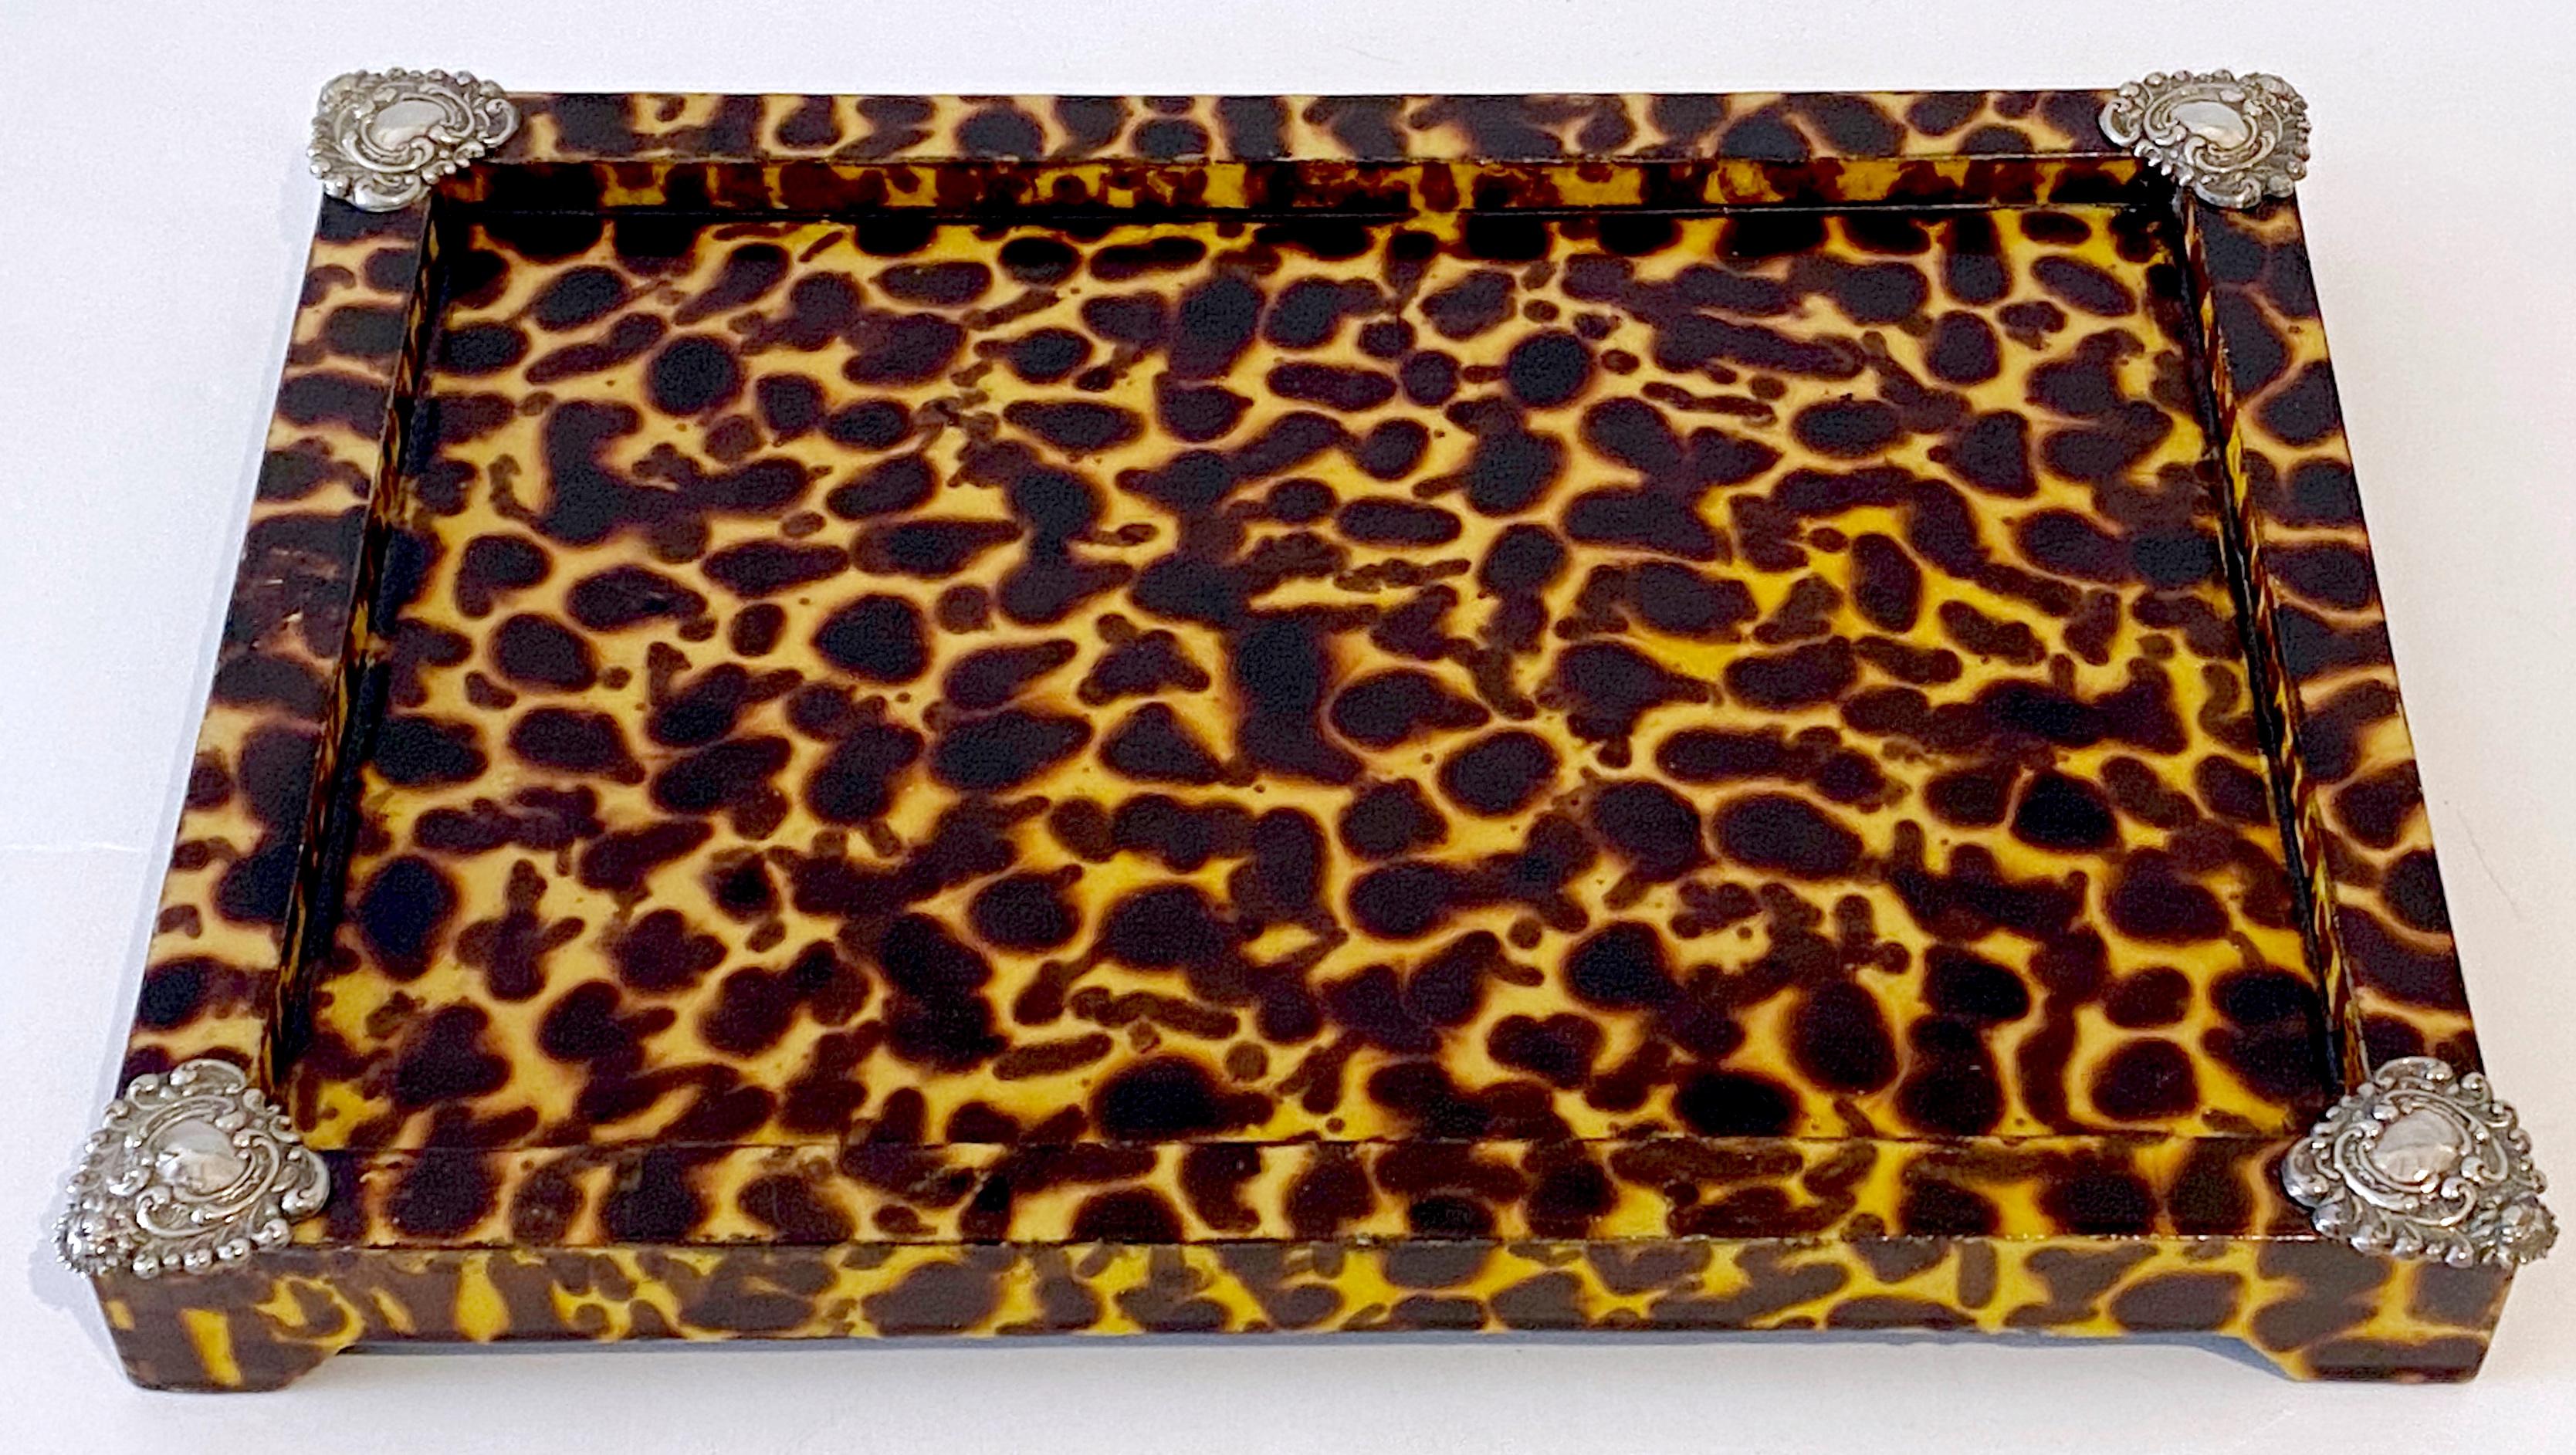 Sheik Sterling Silver Mounted Faux Tortoise Shell Lacquered Tray
European, Later 20th Century 

This later 20th-century European tray is a striking piece, featuring a rectangular form and adorned with sterling silver-mounted heart-shaped repoussé